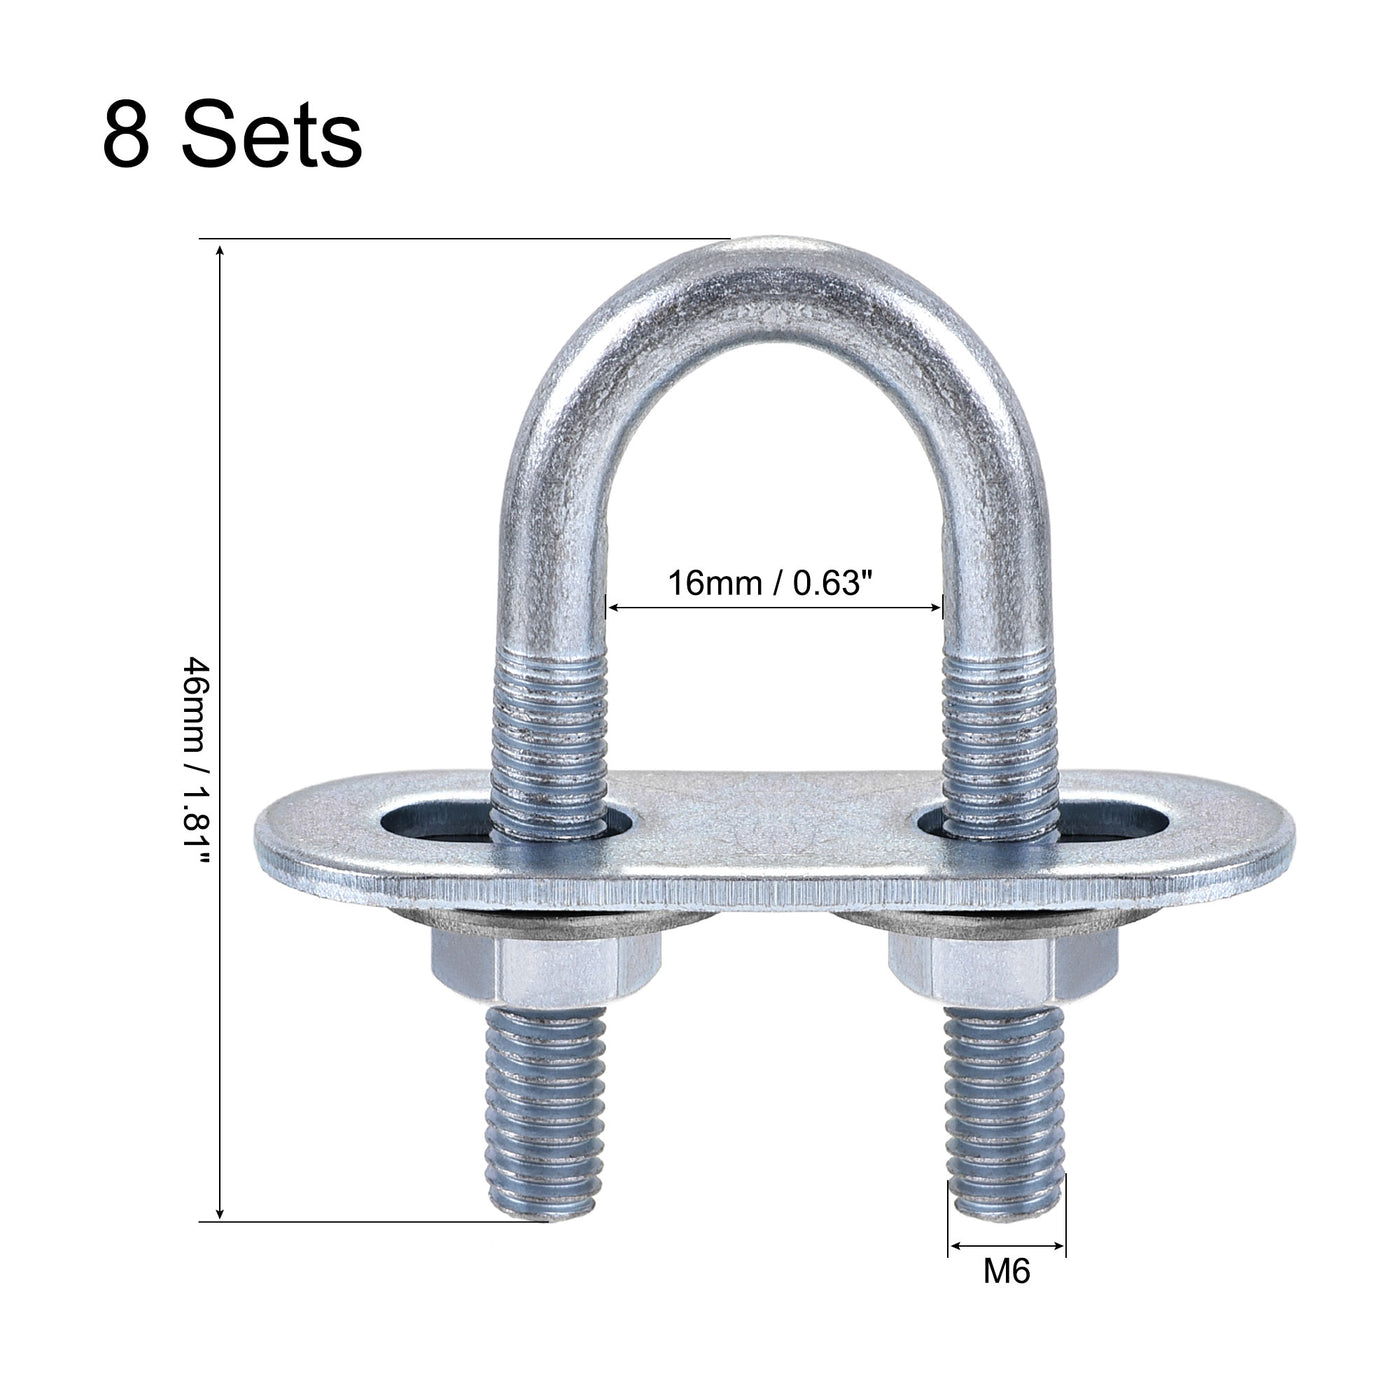 Uxcell Uxcell Round U-Bolt 22mm Inner Width 70mm Length Steel M6 with Nut Plate Washer 8 Sets